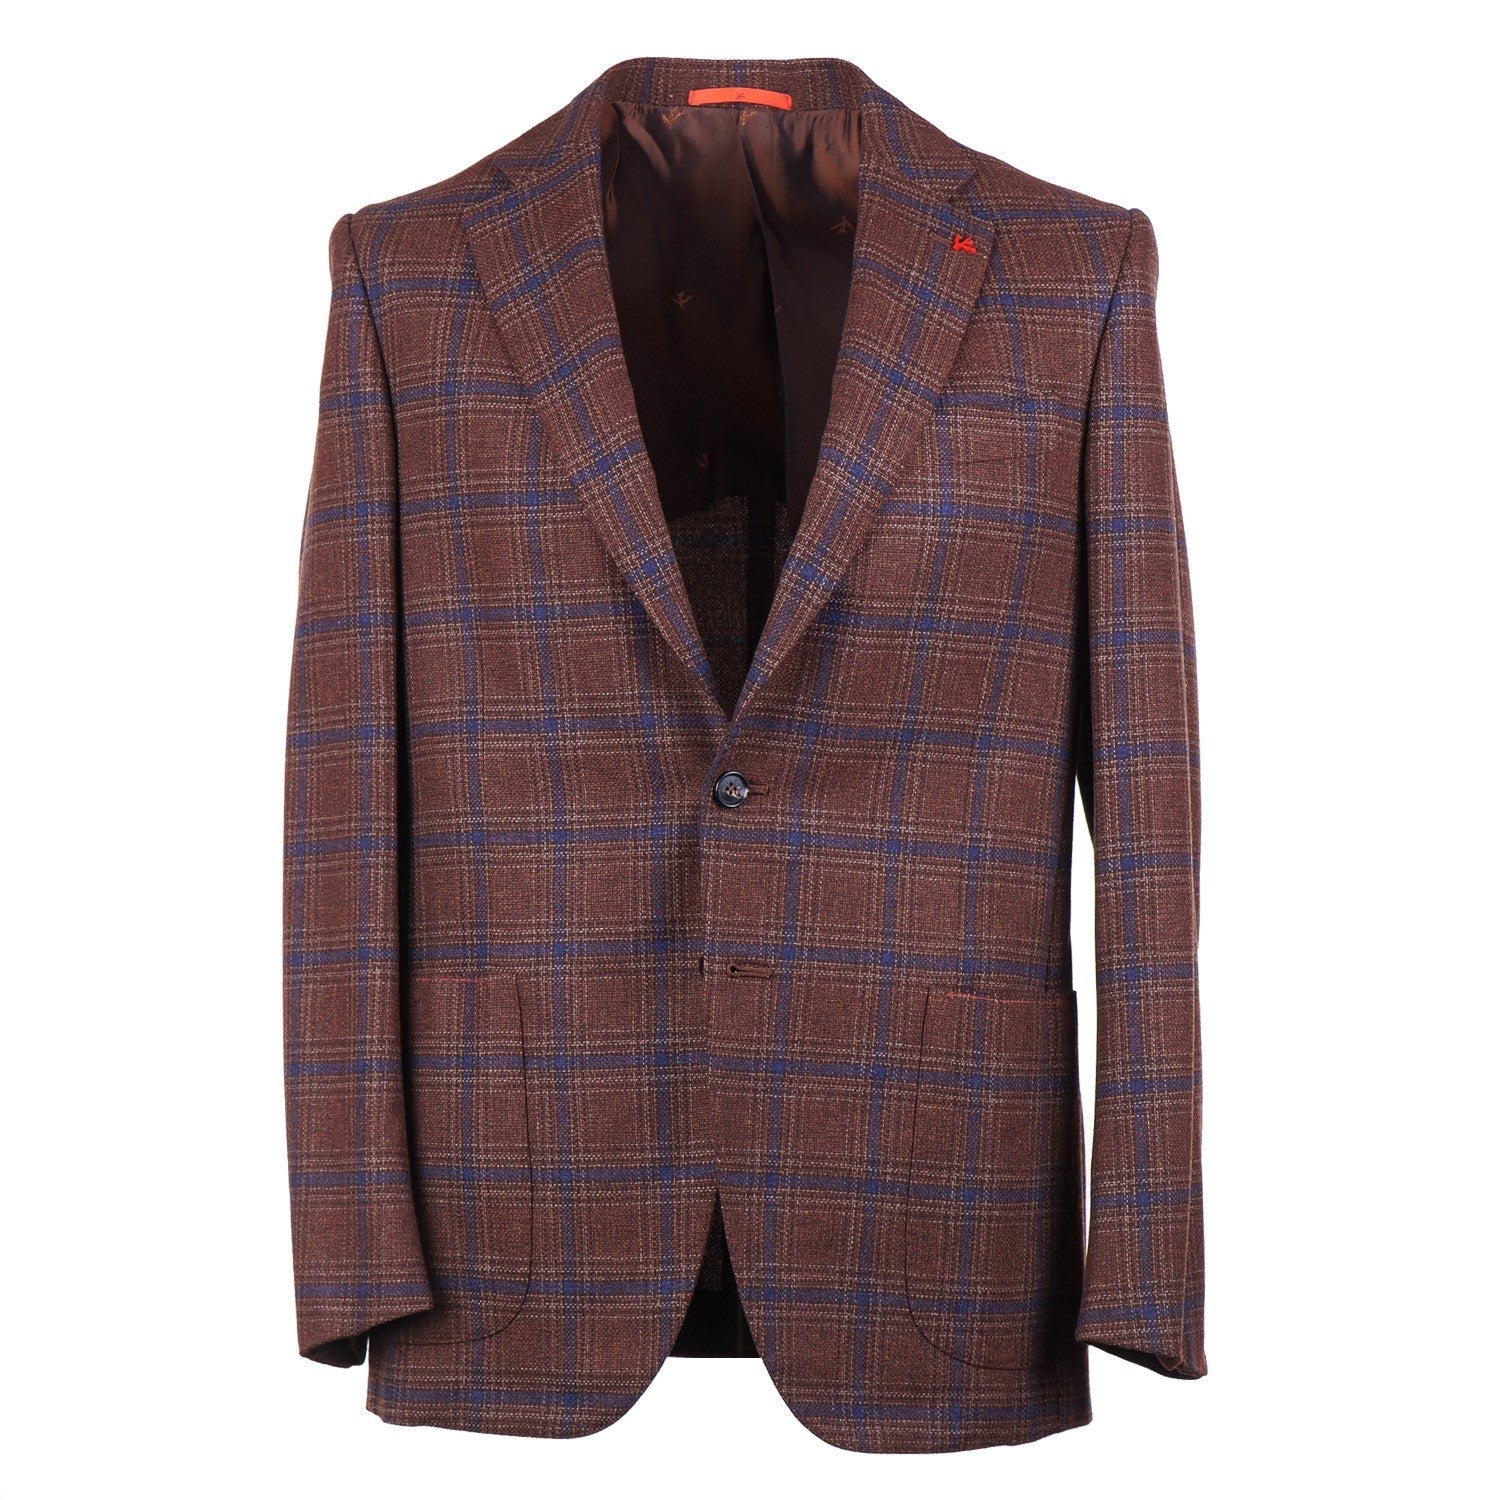 Isaia Tailored-Fit Wool-Cashmere Sport Coat - Top Shelf Apparel